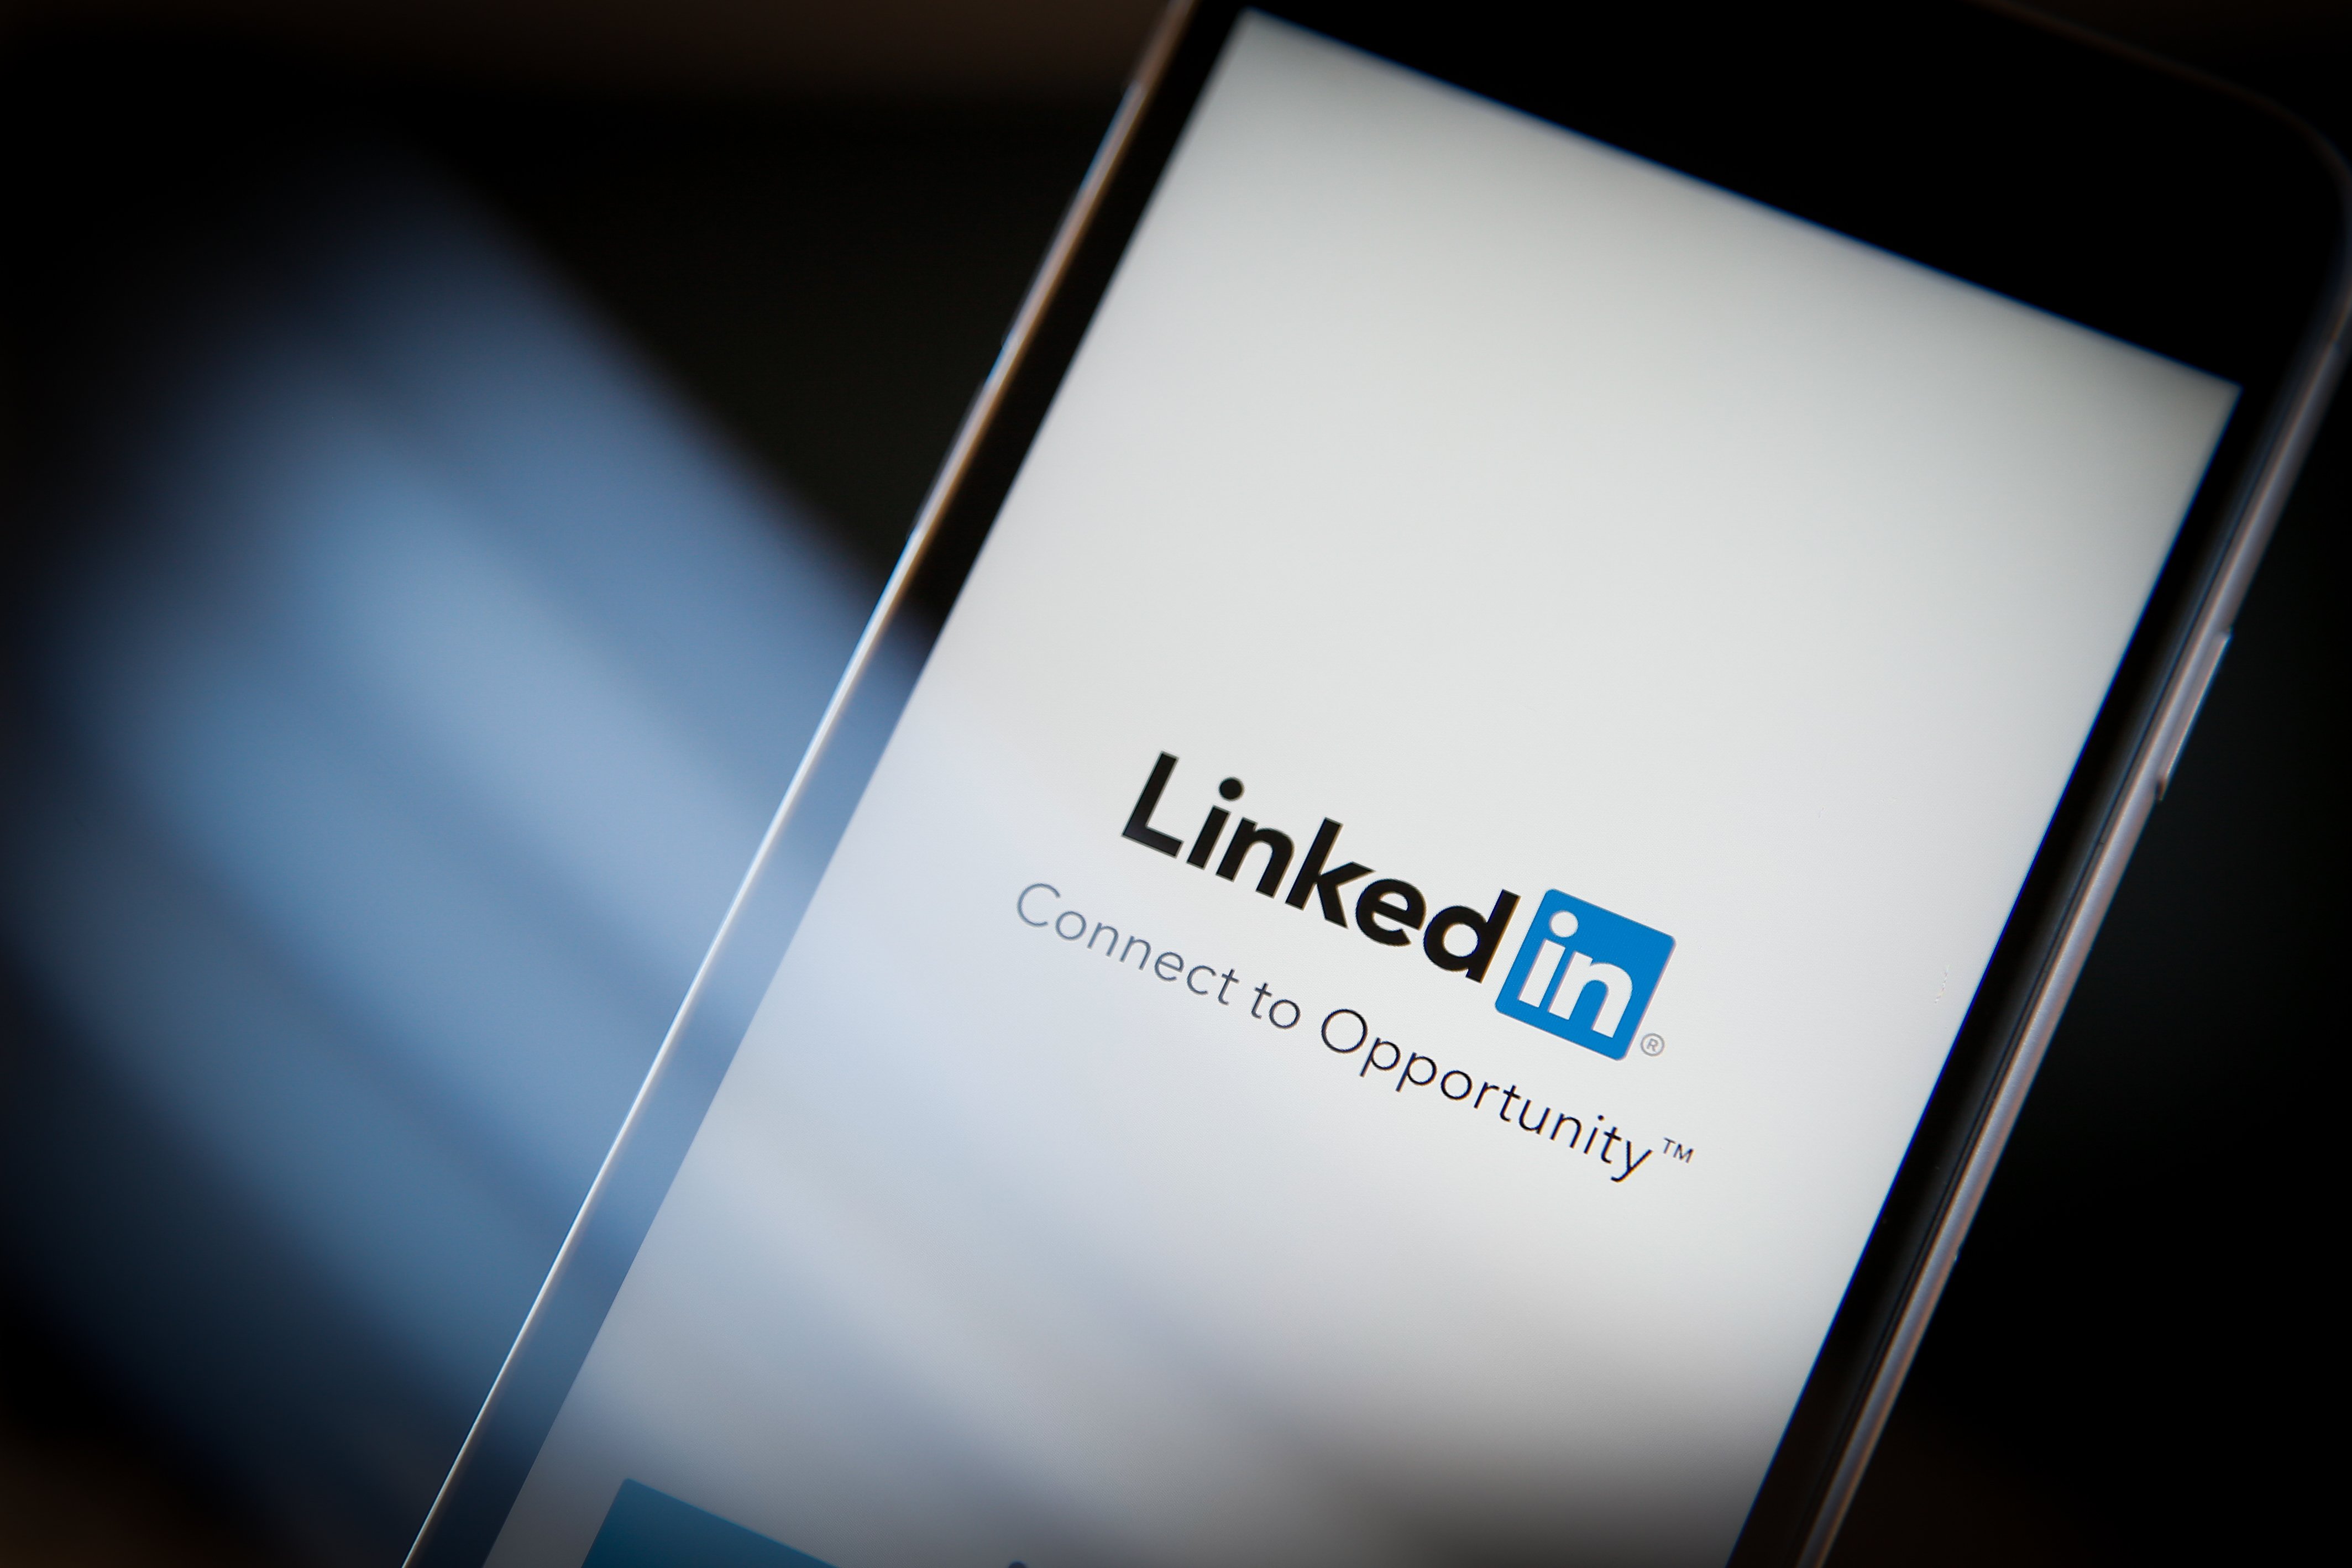 The LinkedIn app and logo is seen on a digital device.